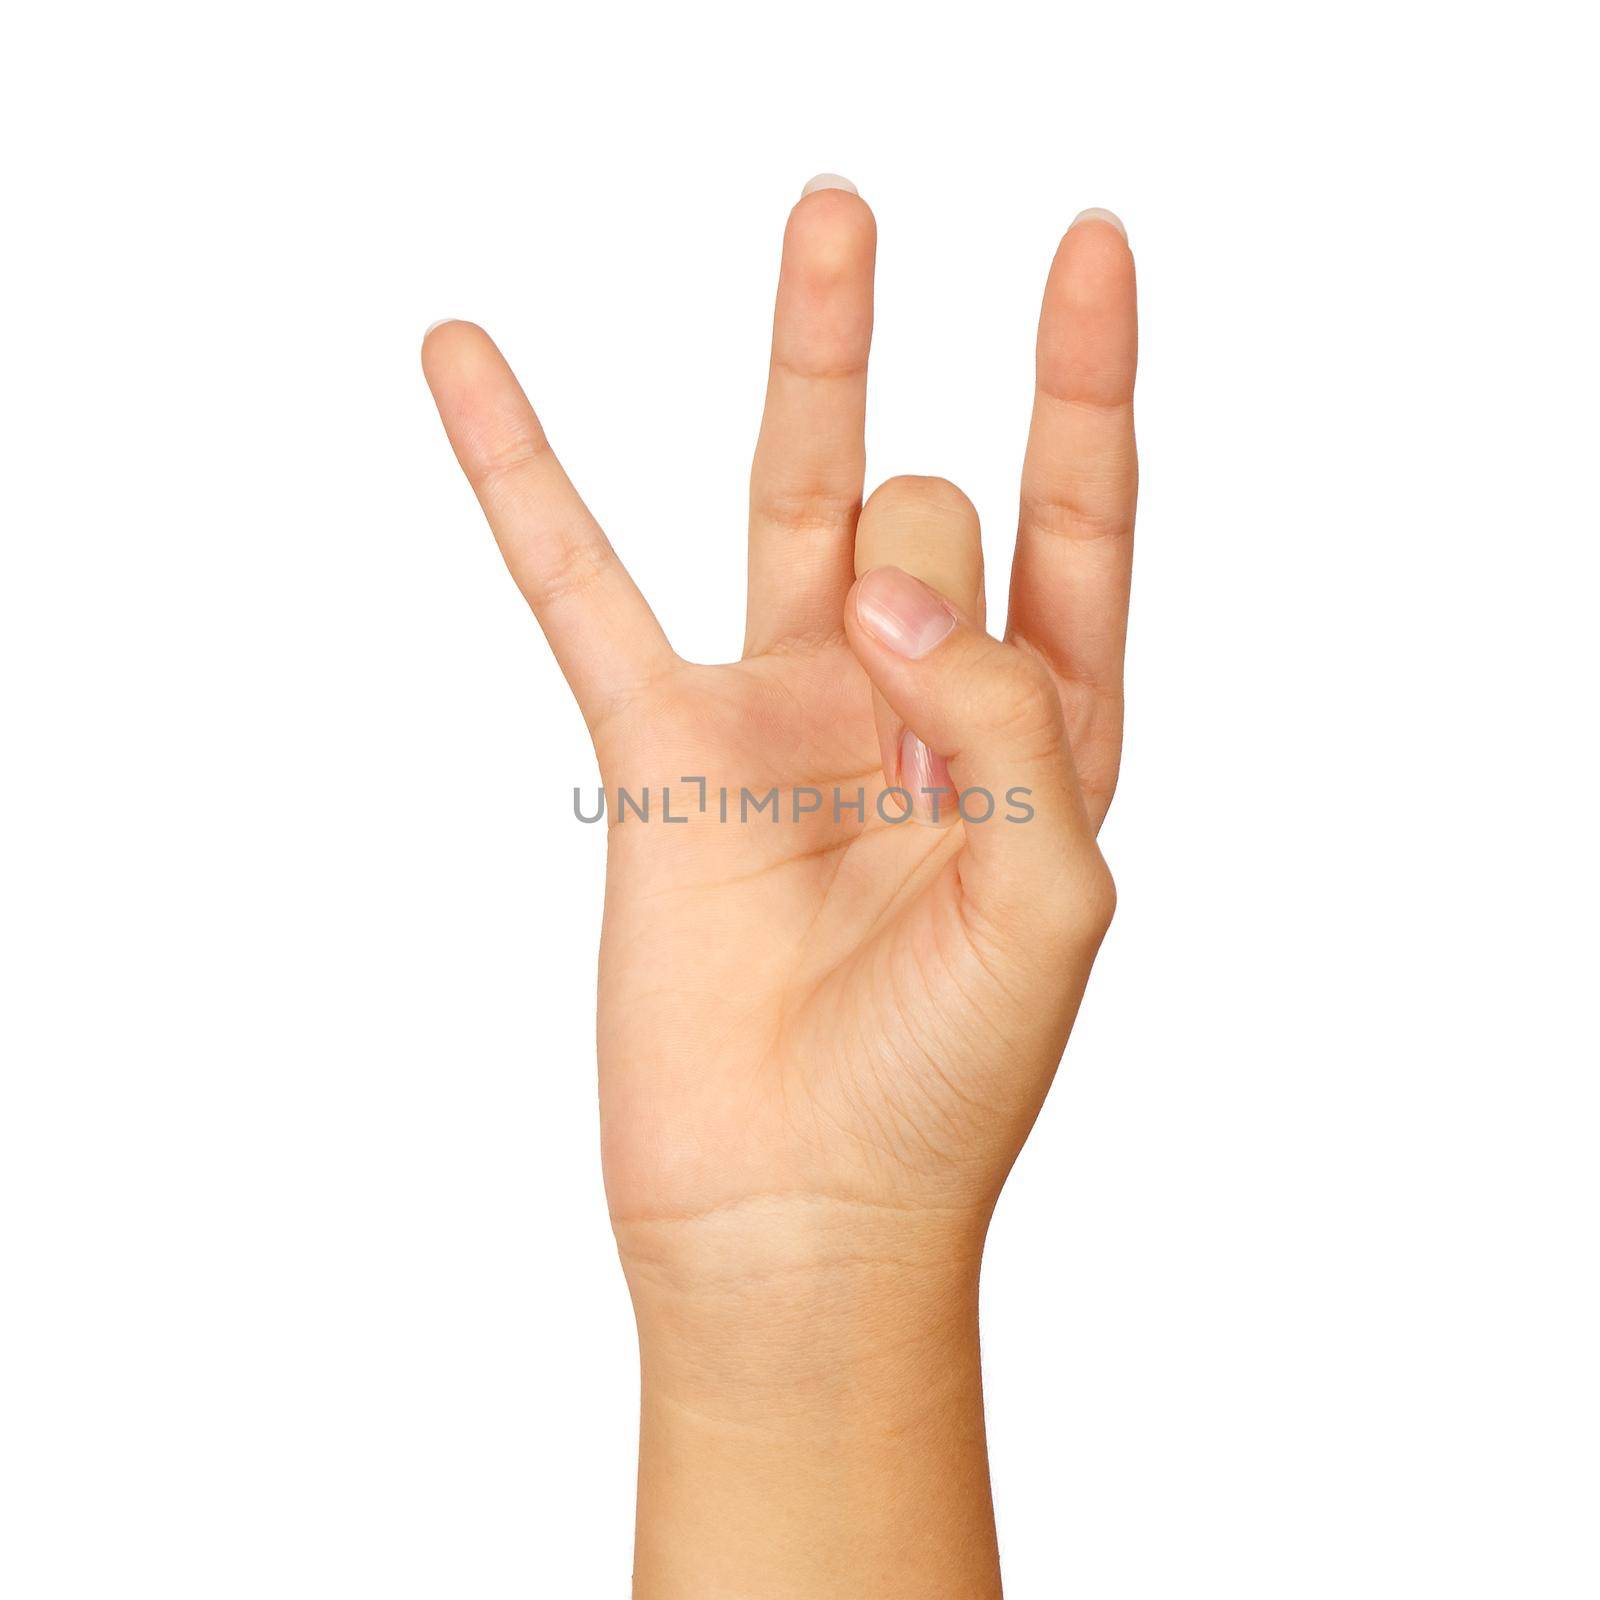 american sign language number 8. female hand gesturing isolated on white background